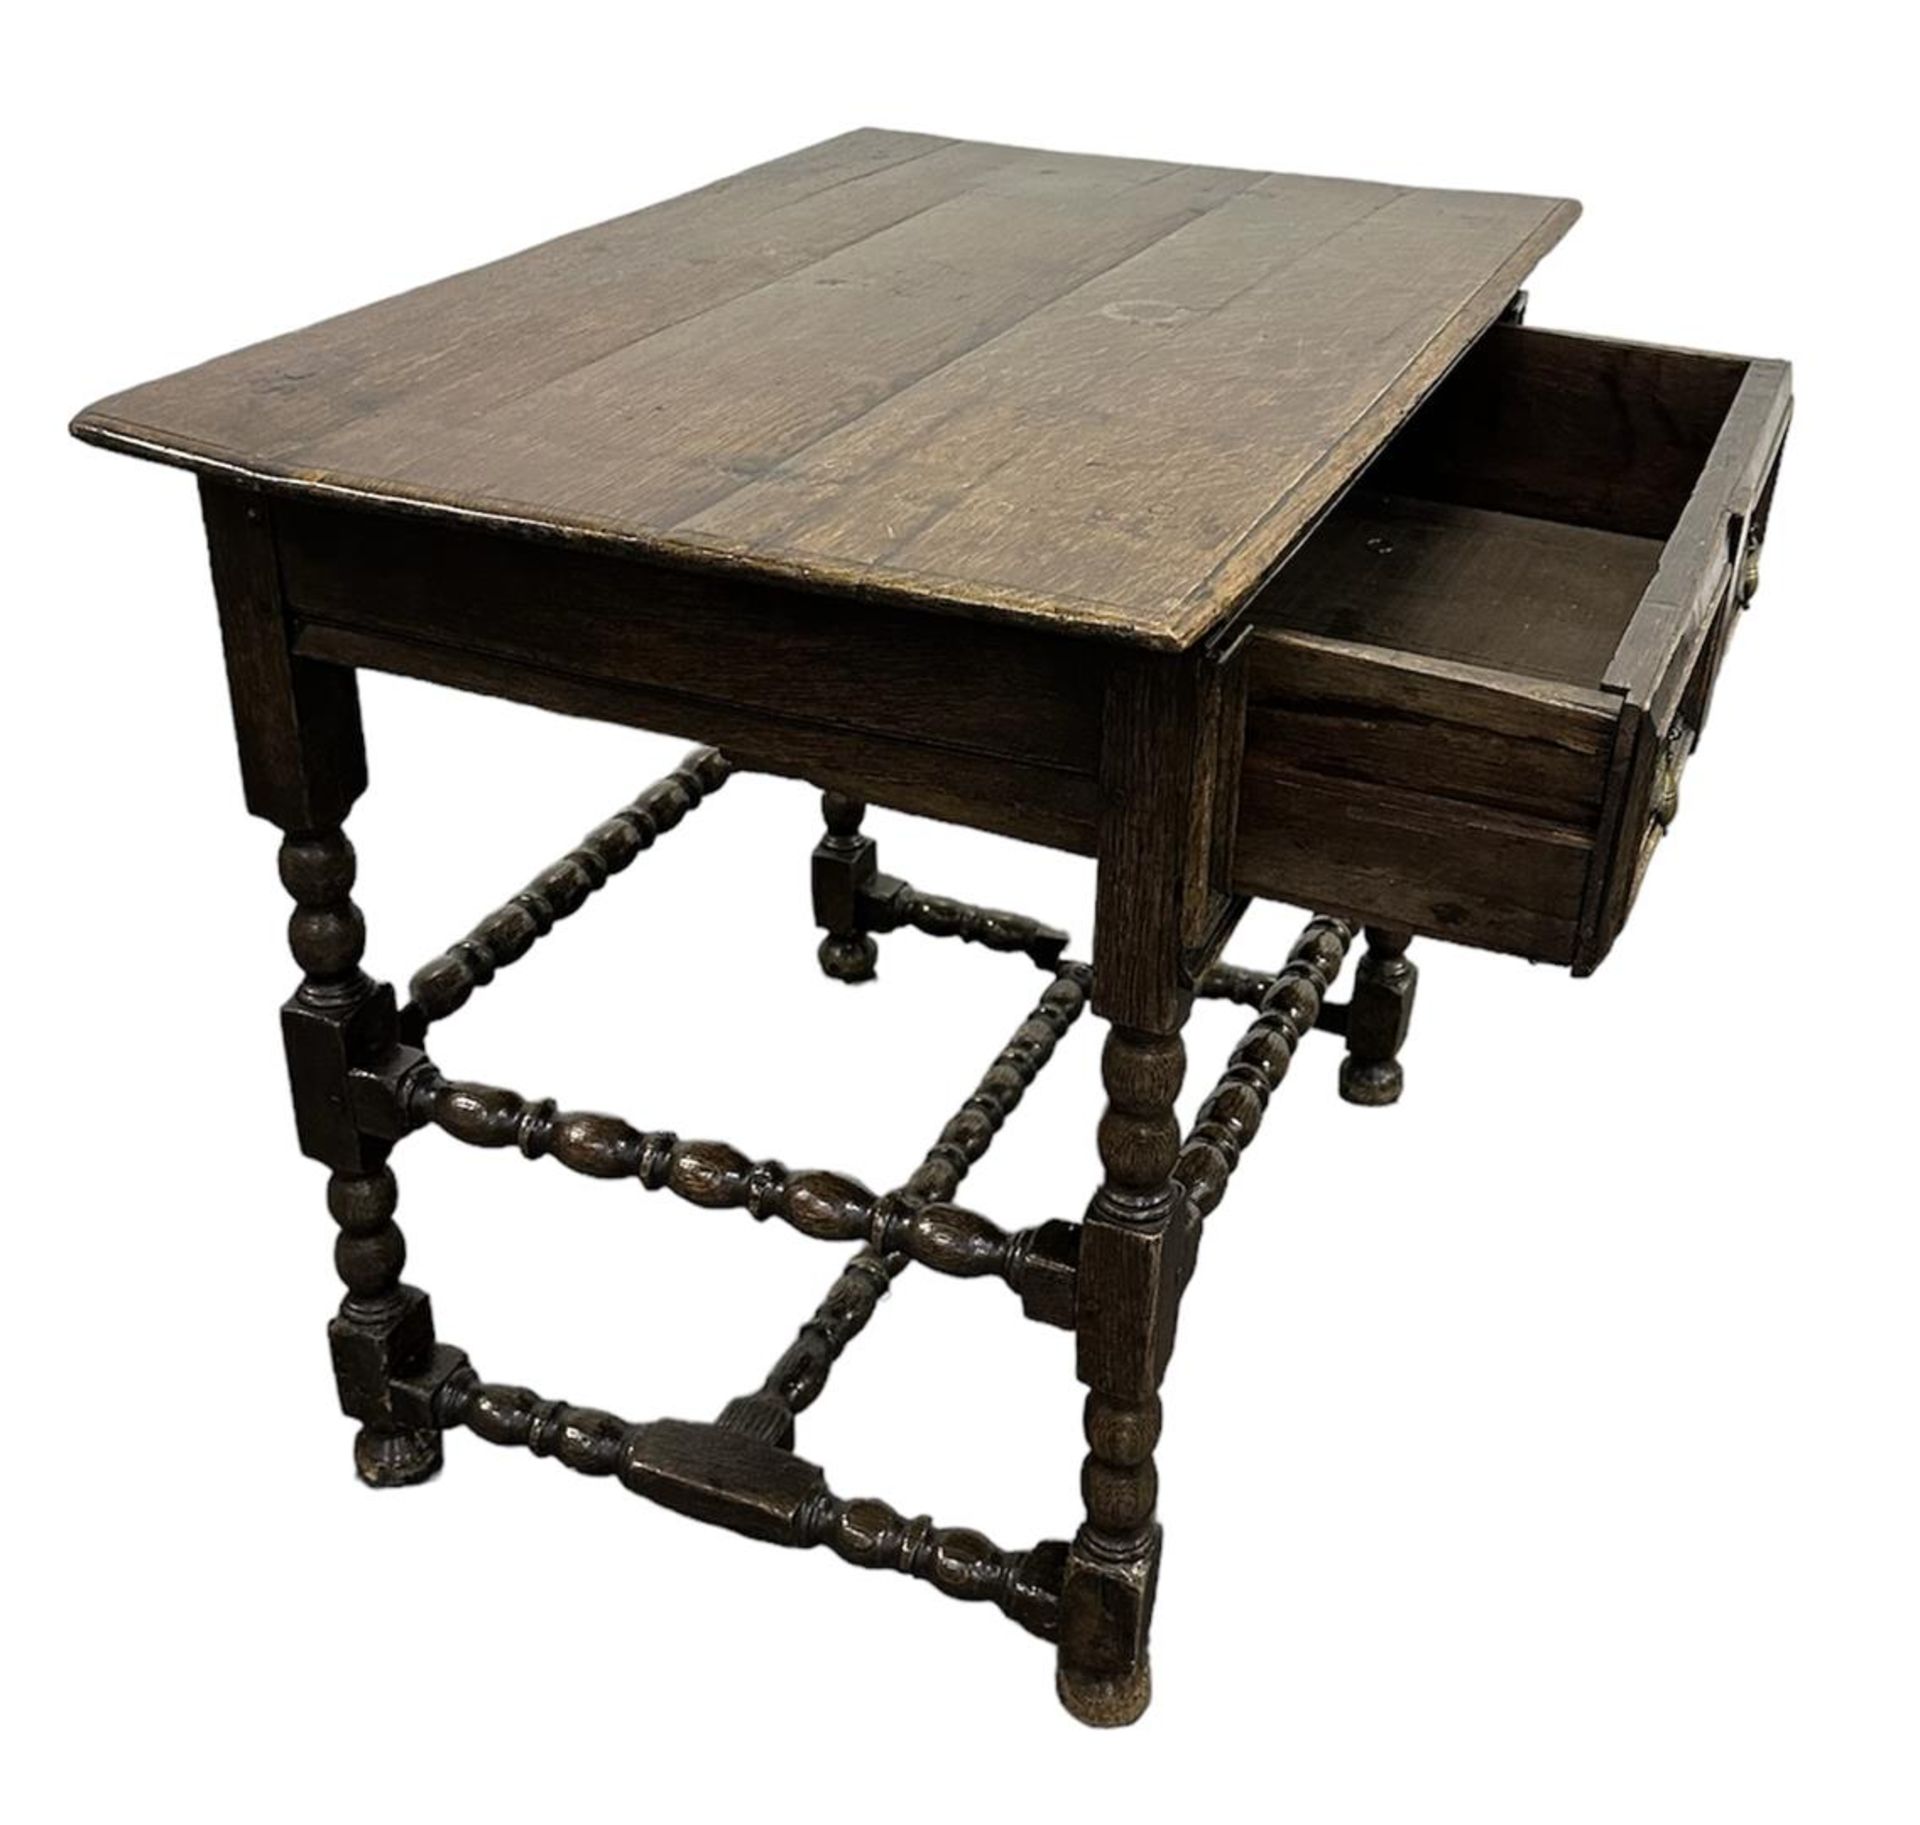 An oak table on turned legs and with ditto rules. England, 18th/19th century.